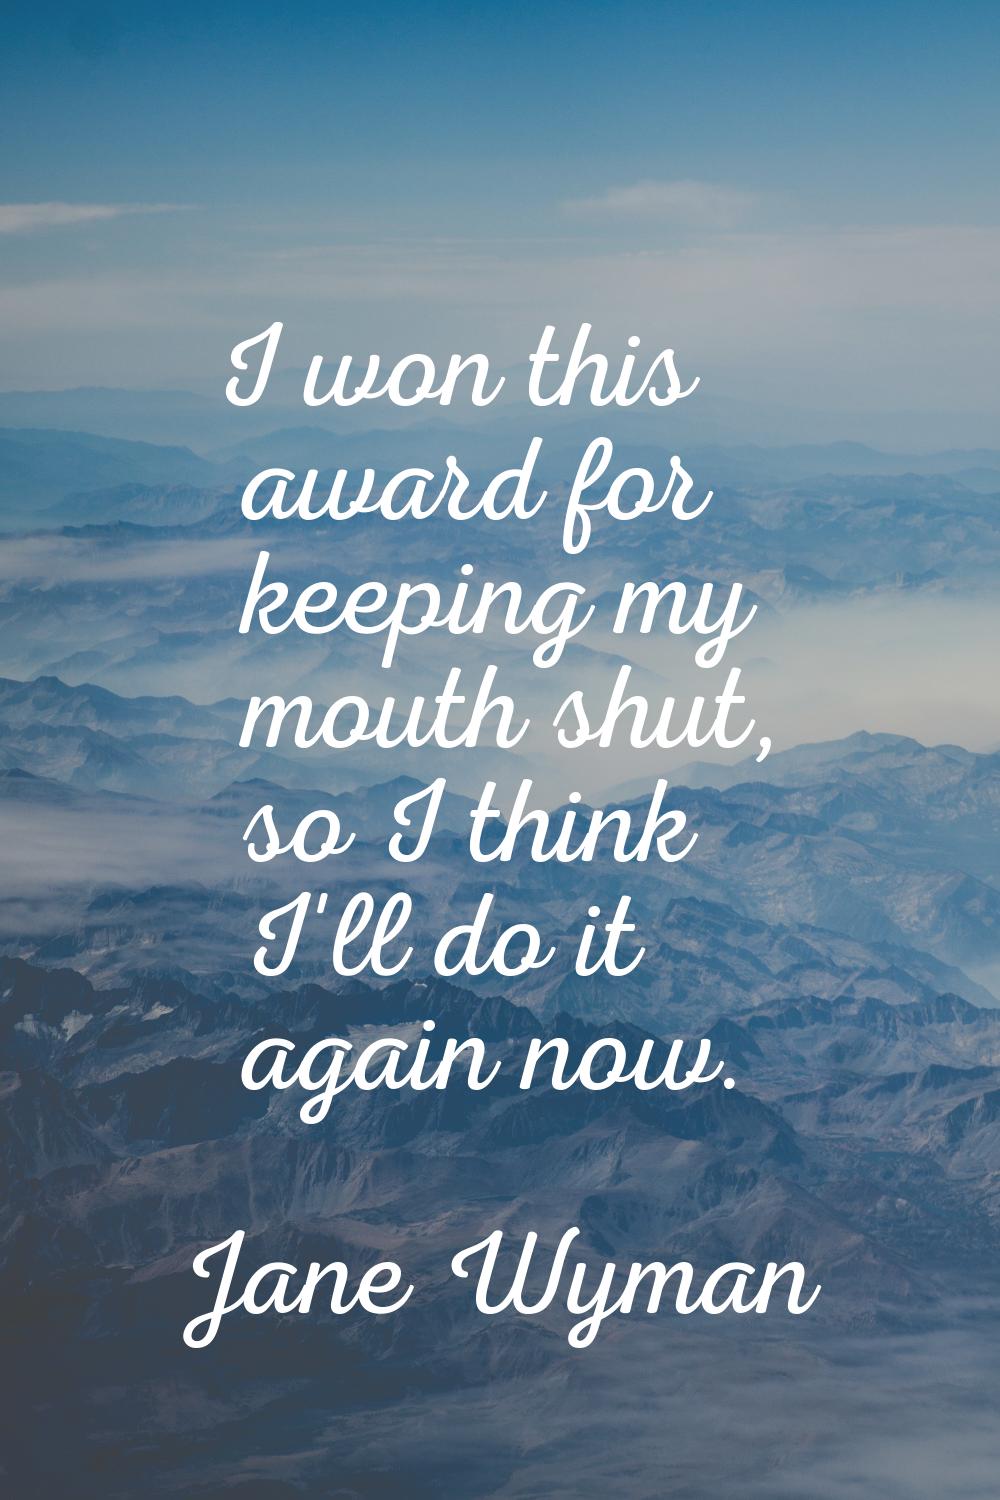 I won this award for keeping my mouth shut, so I think I'll do it again now.